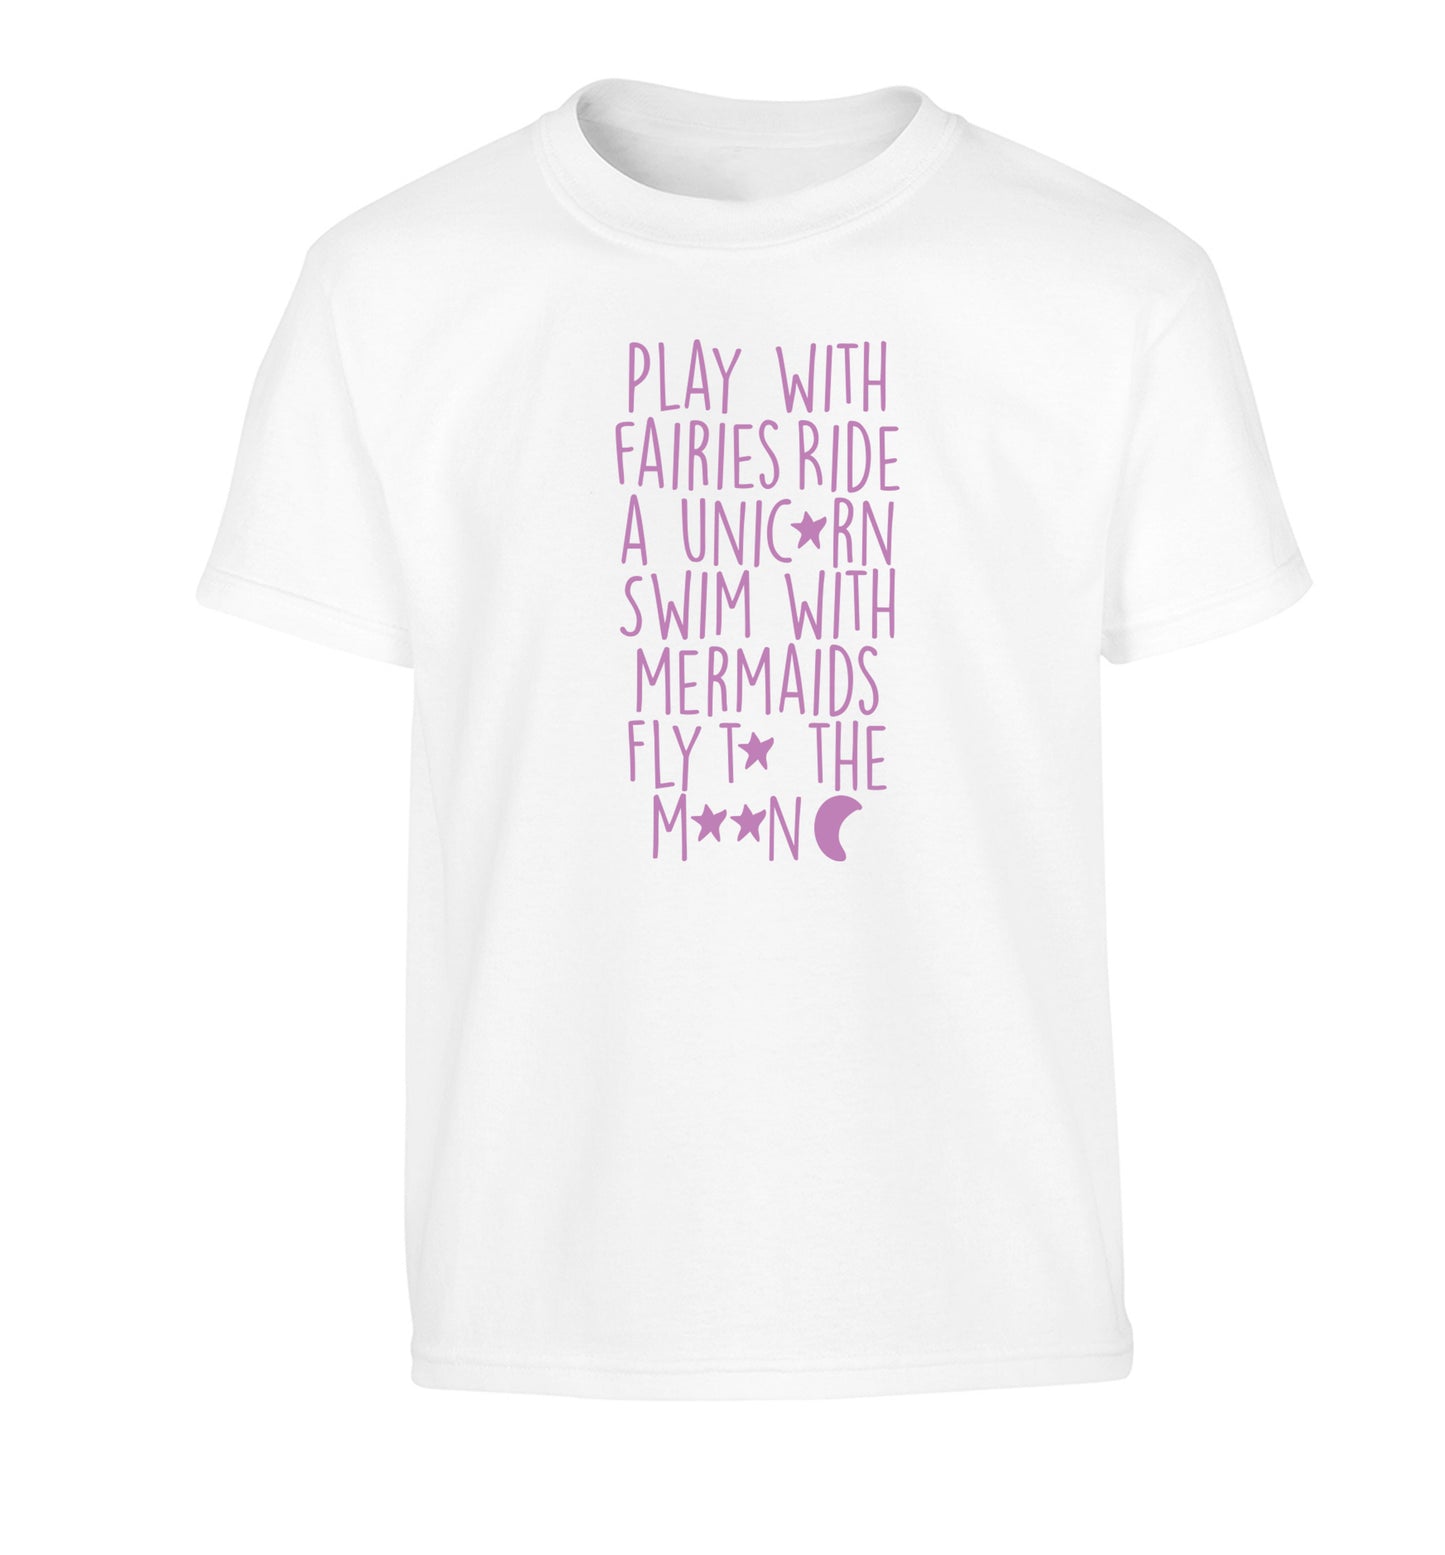 Play with fairies ride a unicorn swim with mermaids fly to the moon Children's white Tshirt 12-14 Years